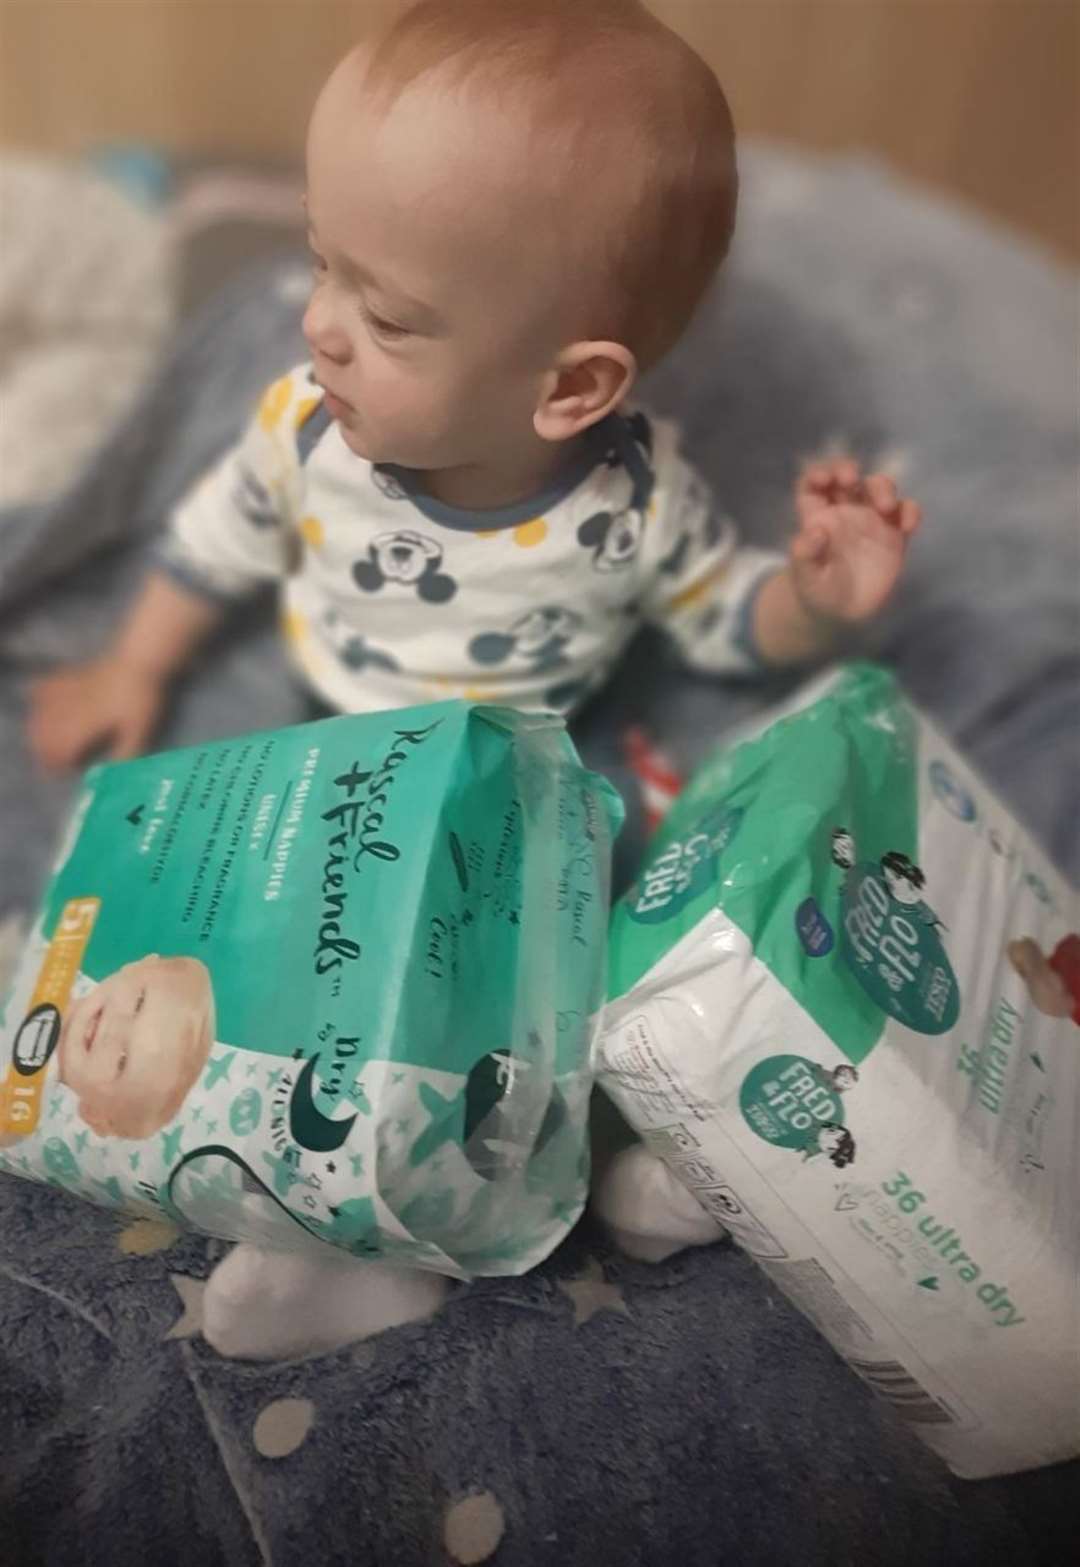 Nappies for Ukraine's youngest are on the wish list.